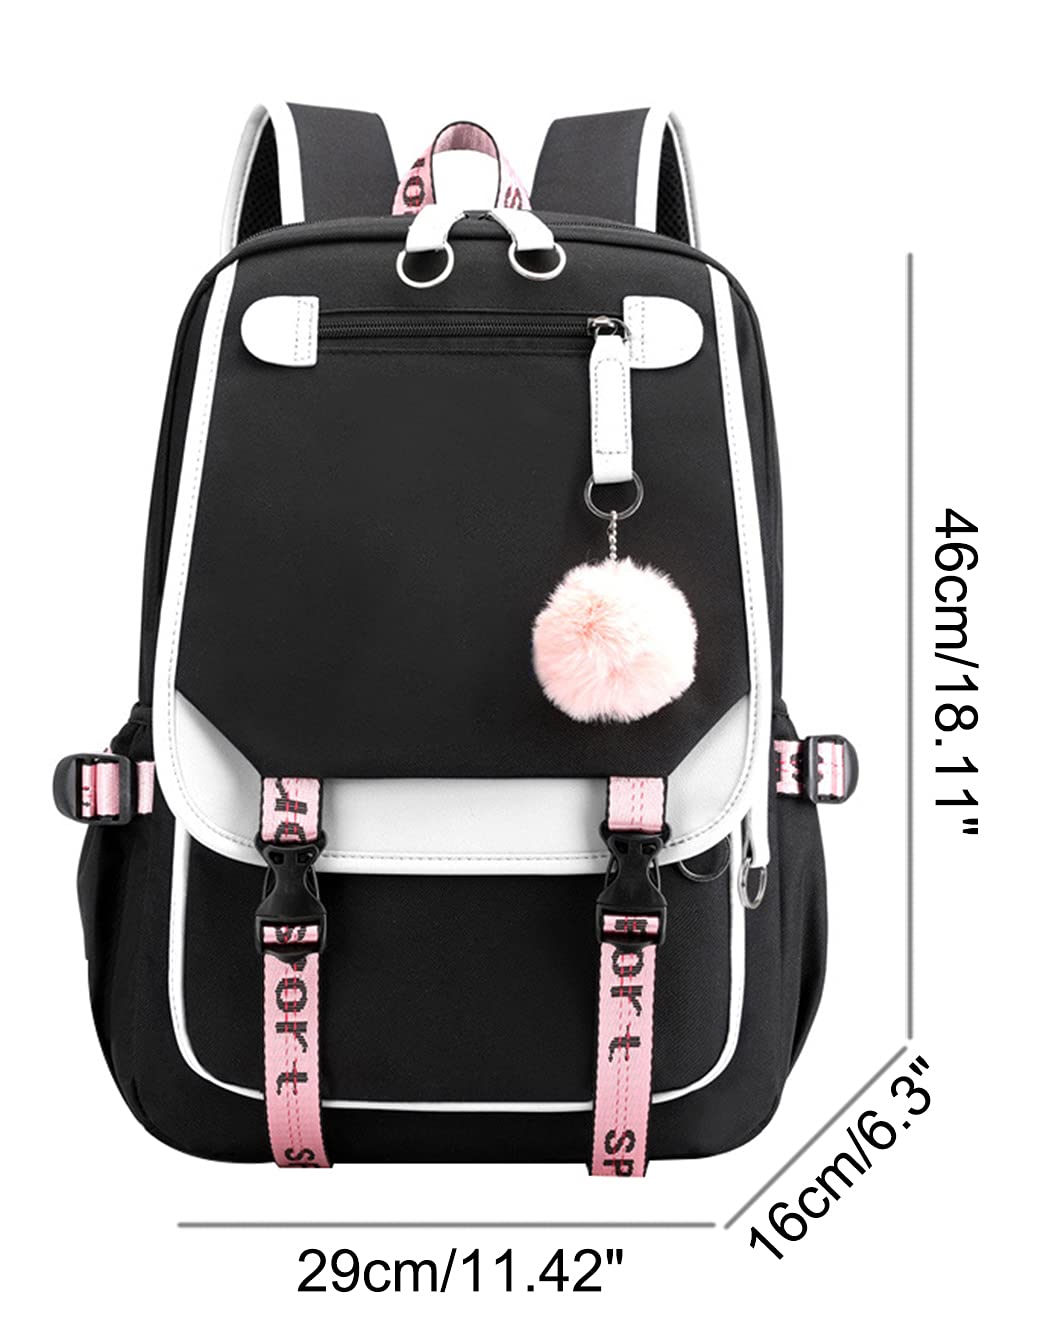 JiaYou Little Girls' School Students Book Bag Outdoor Daypack Backpack with USB Charging Port